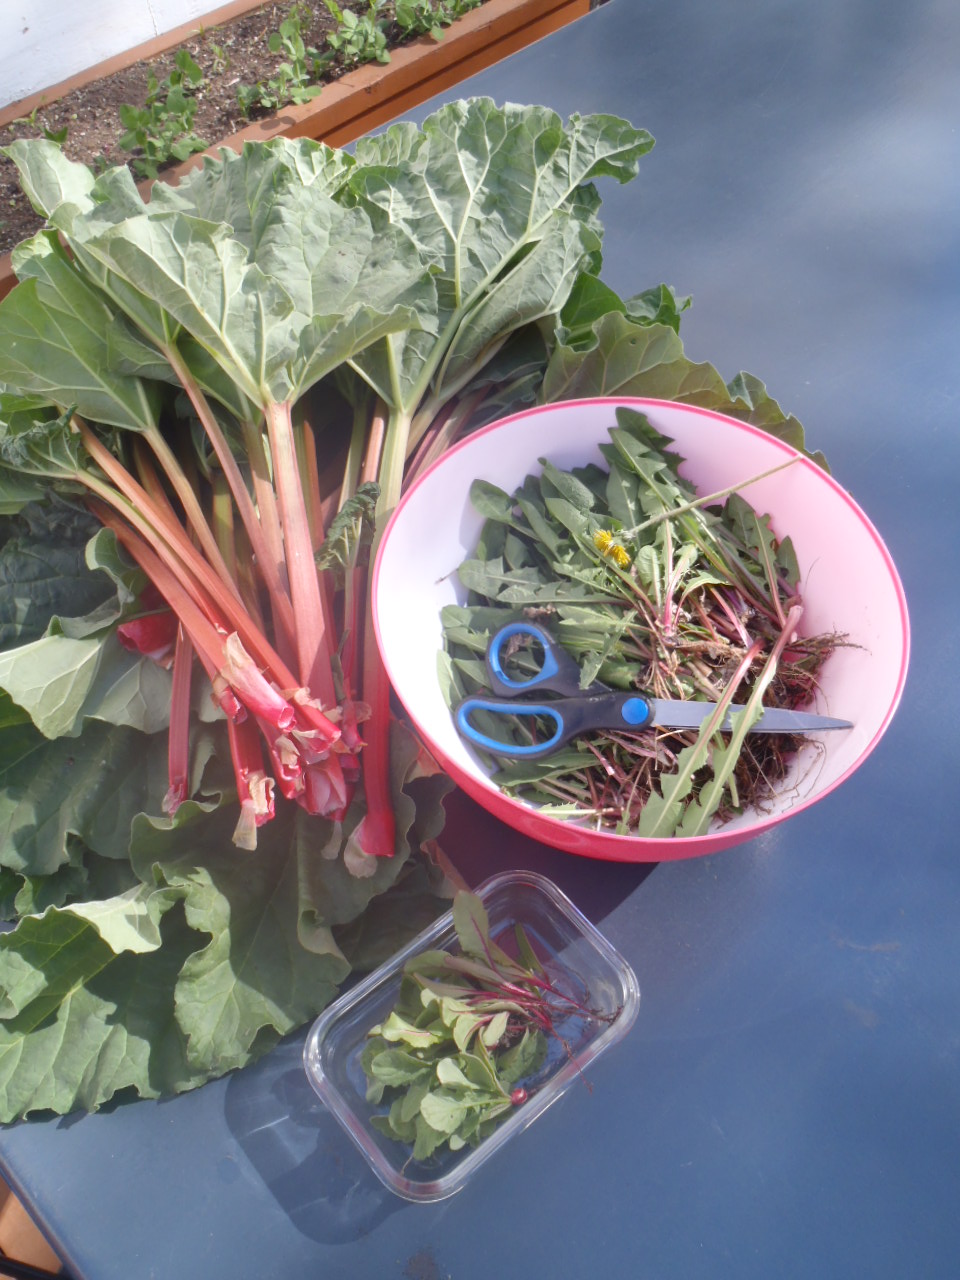 Dandelion and rhubarb from the yard.